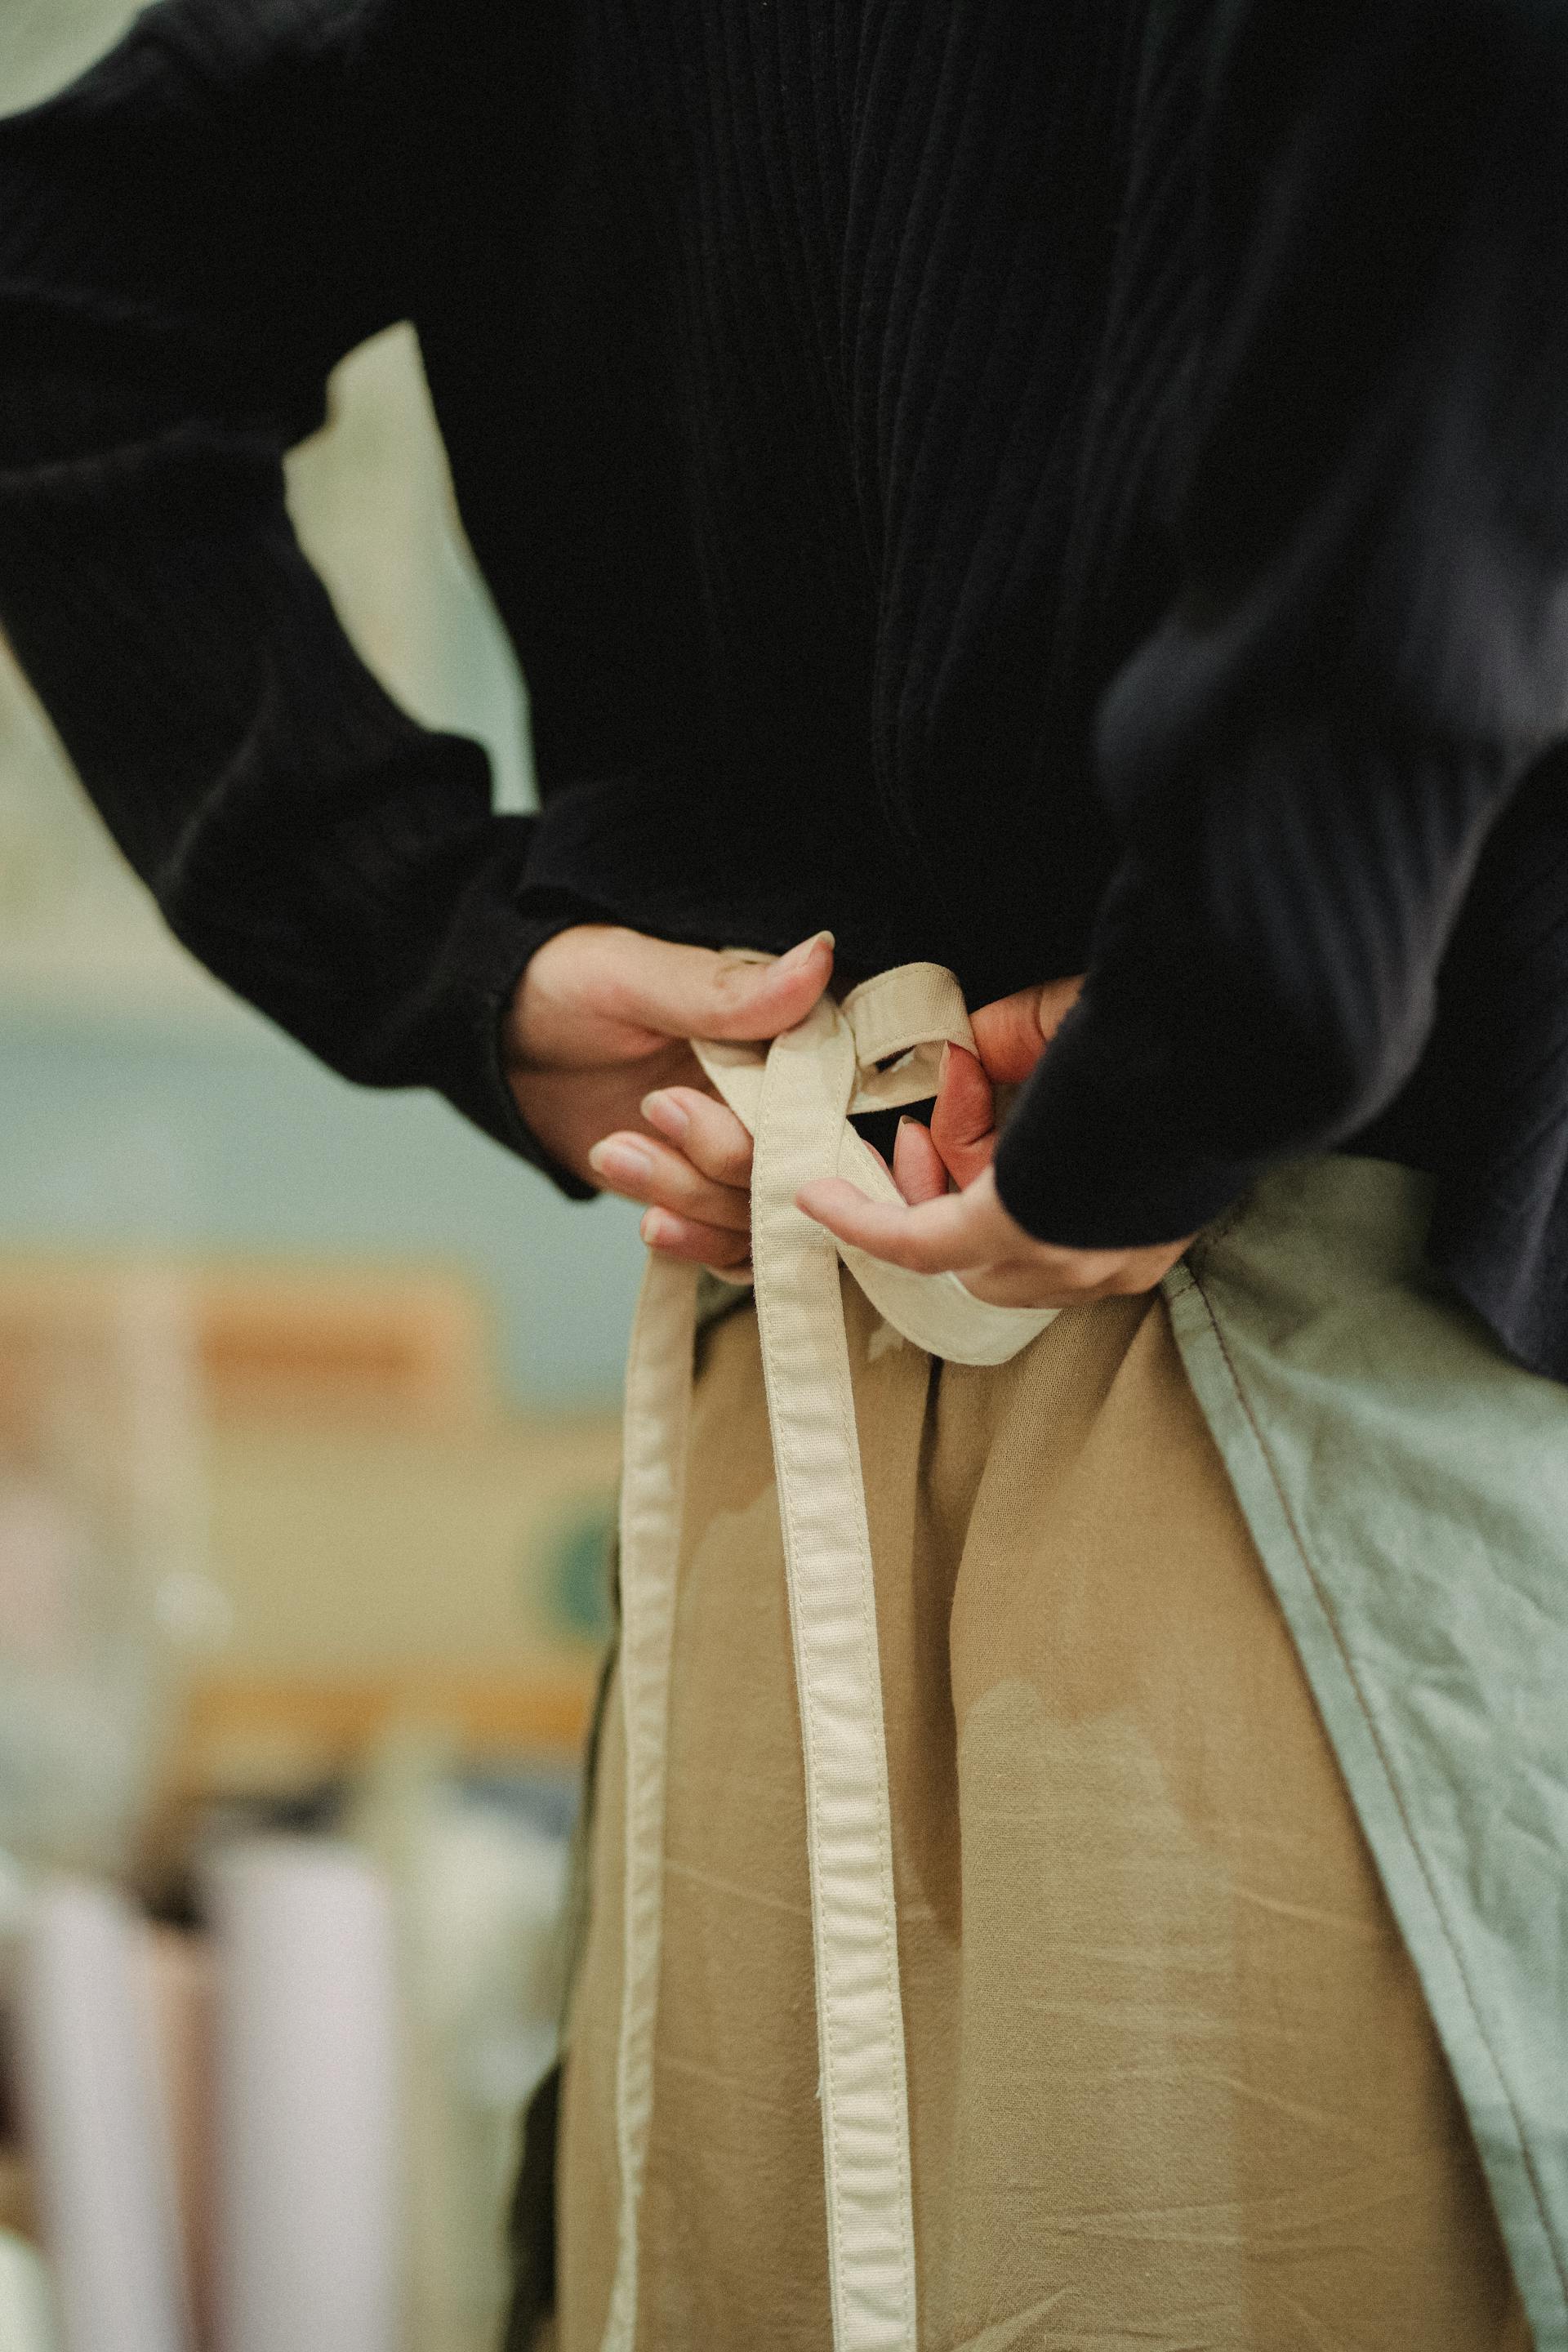 A person tying their apron | Source: Pexels